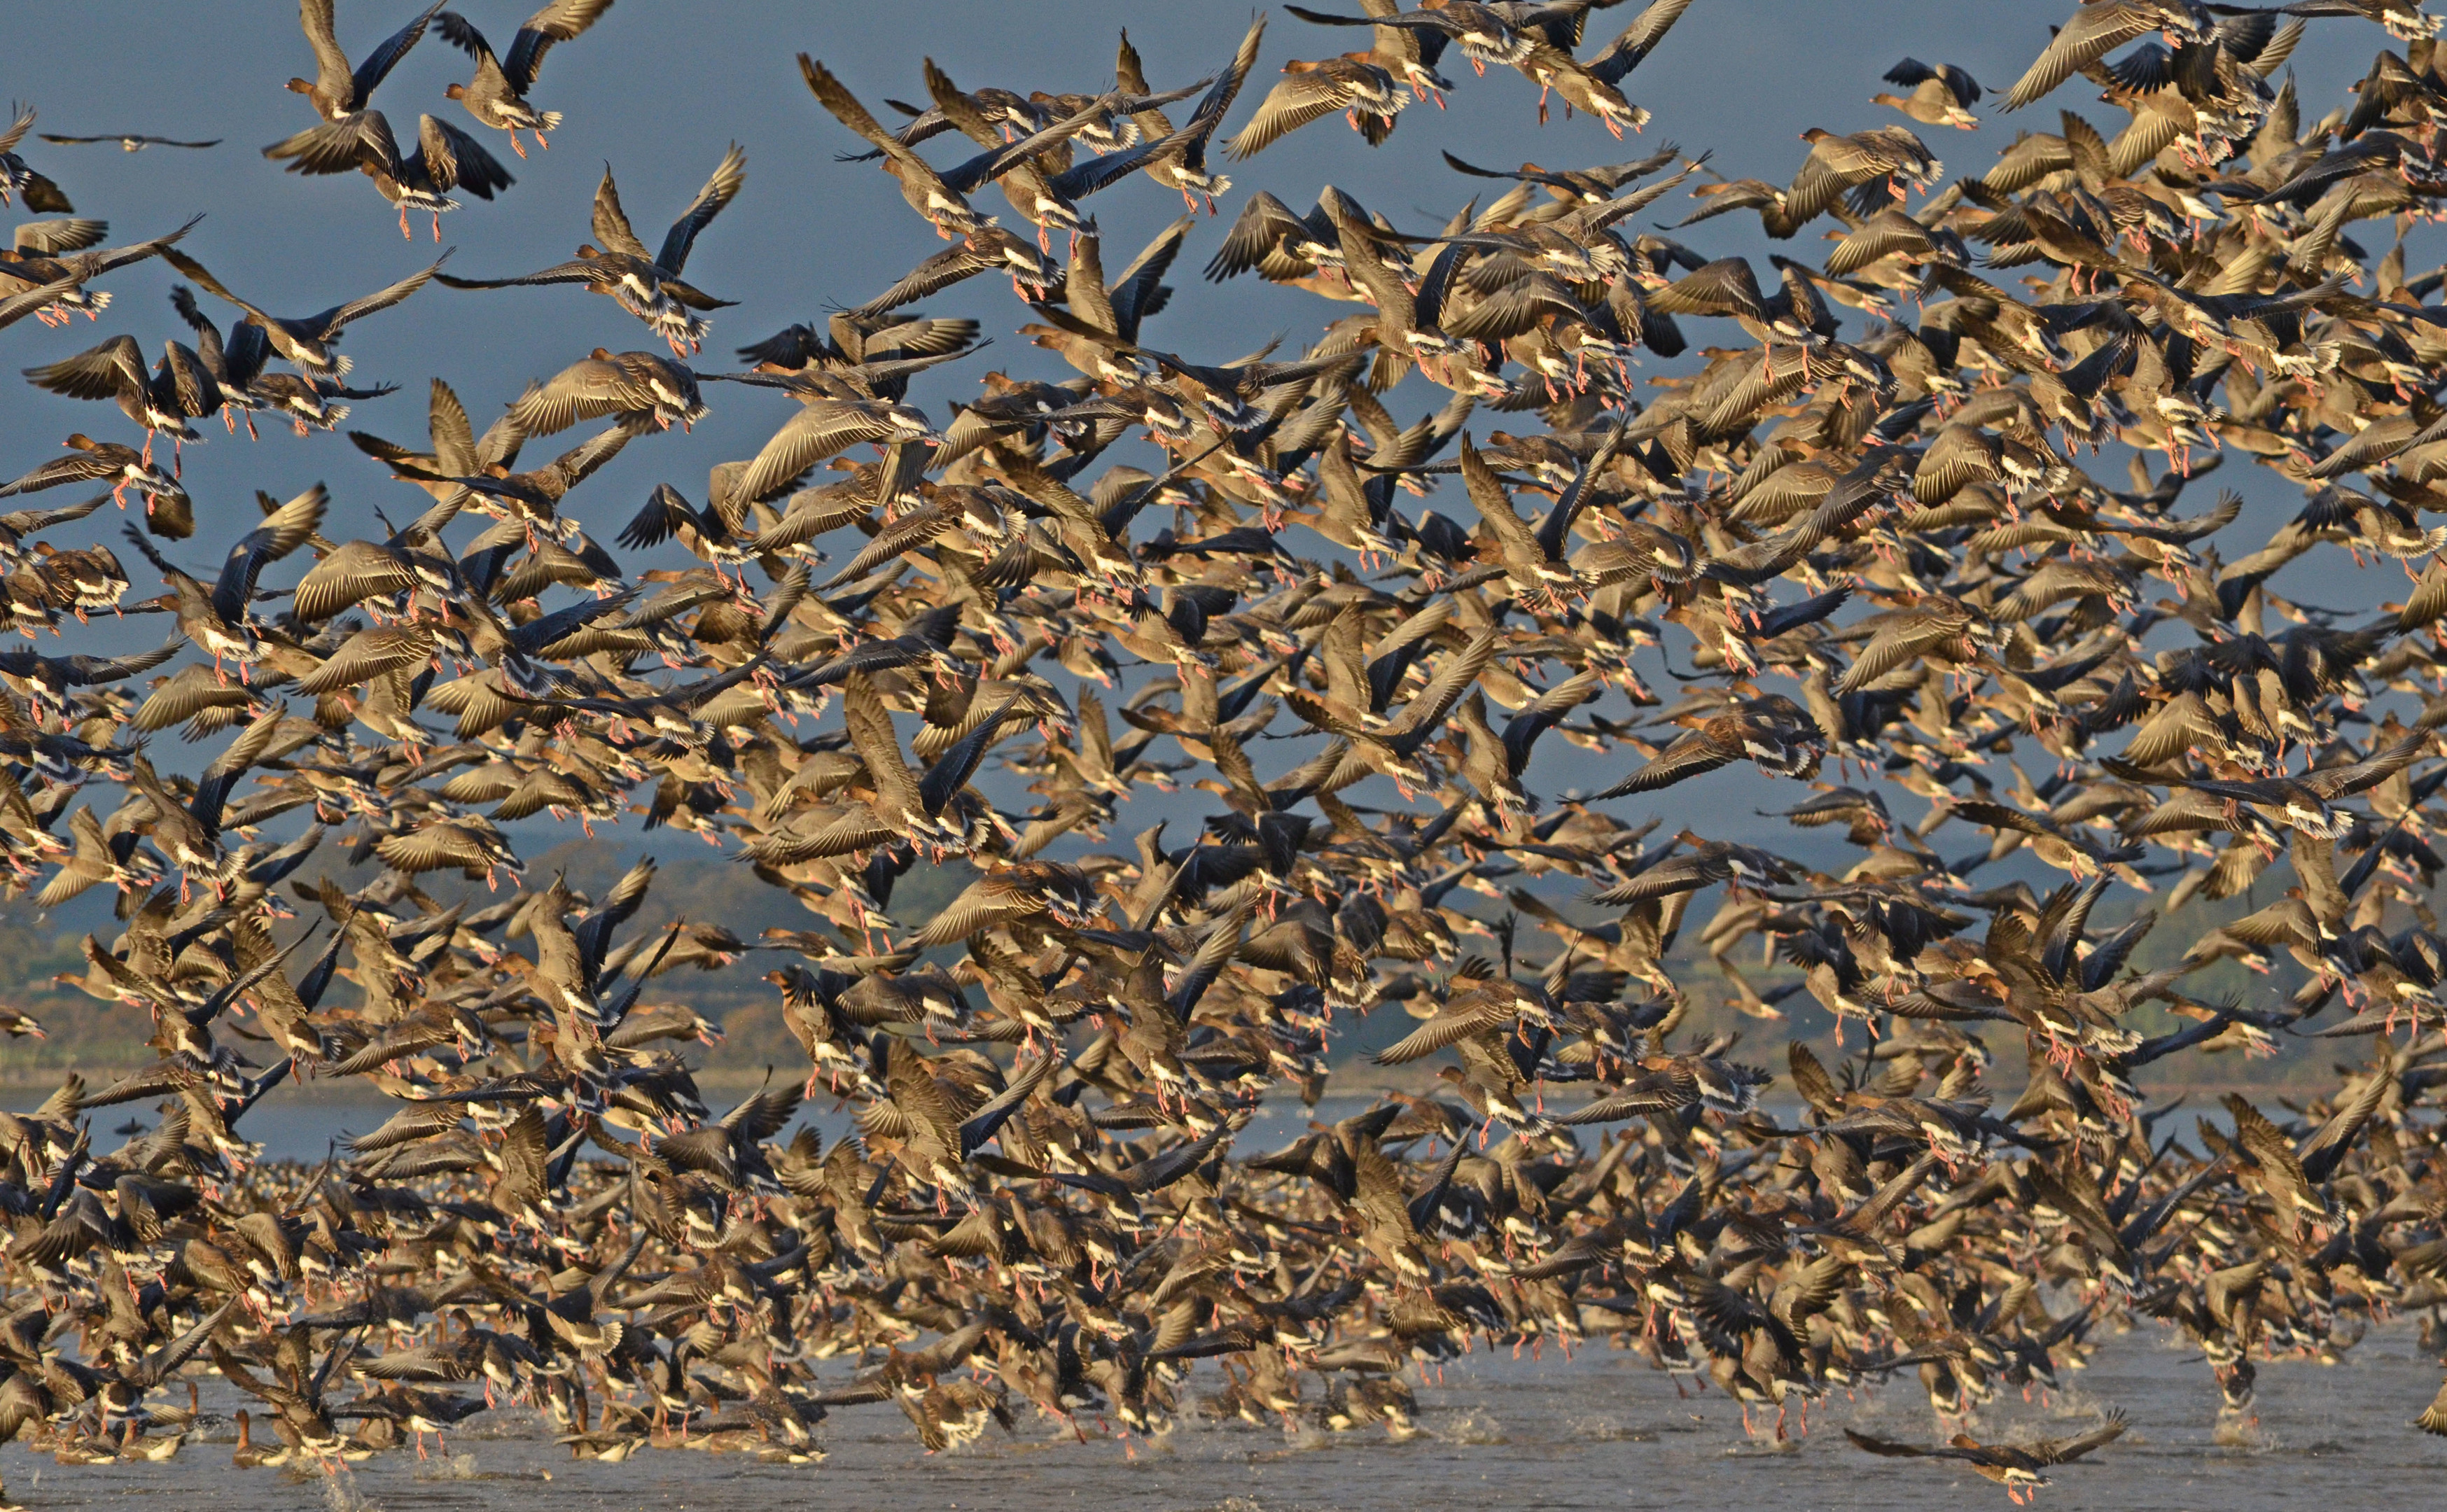 Pink-footed geese